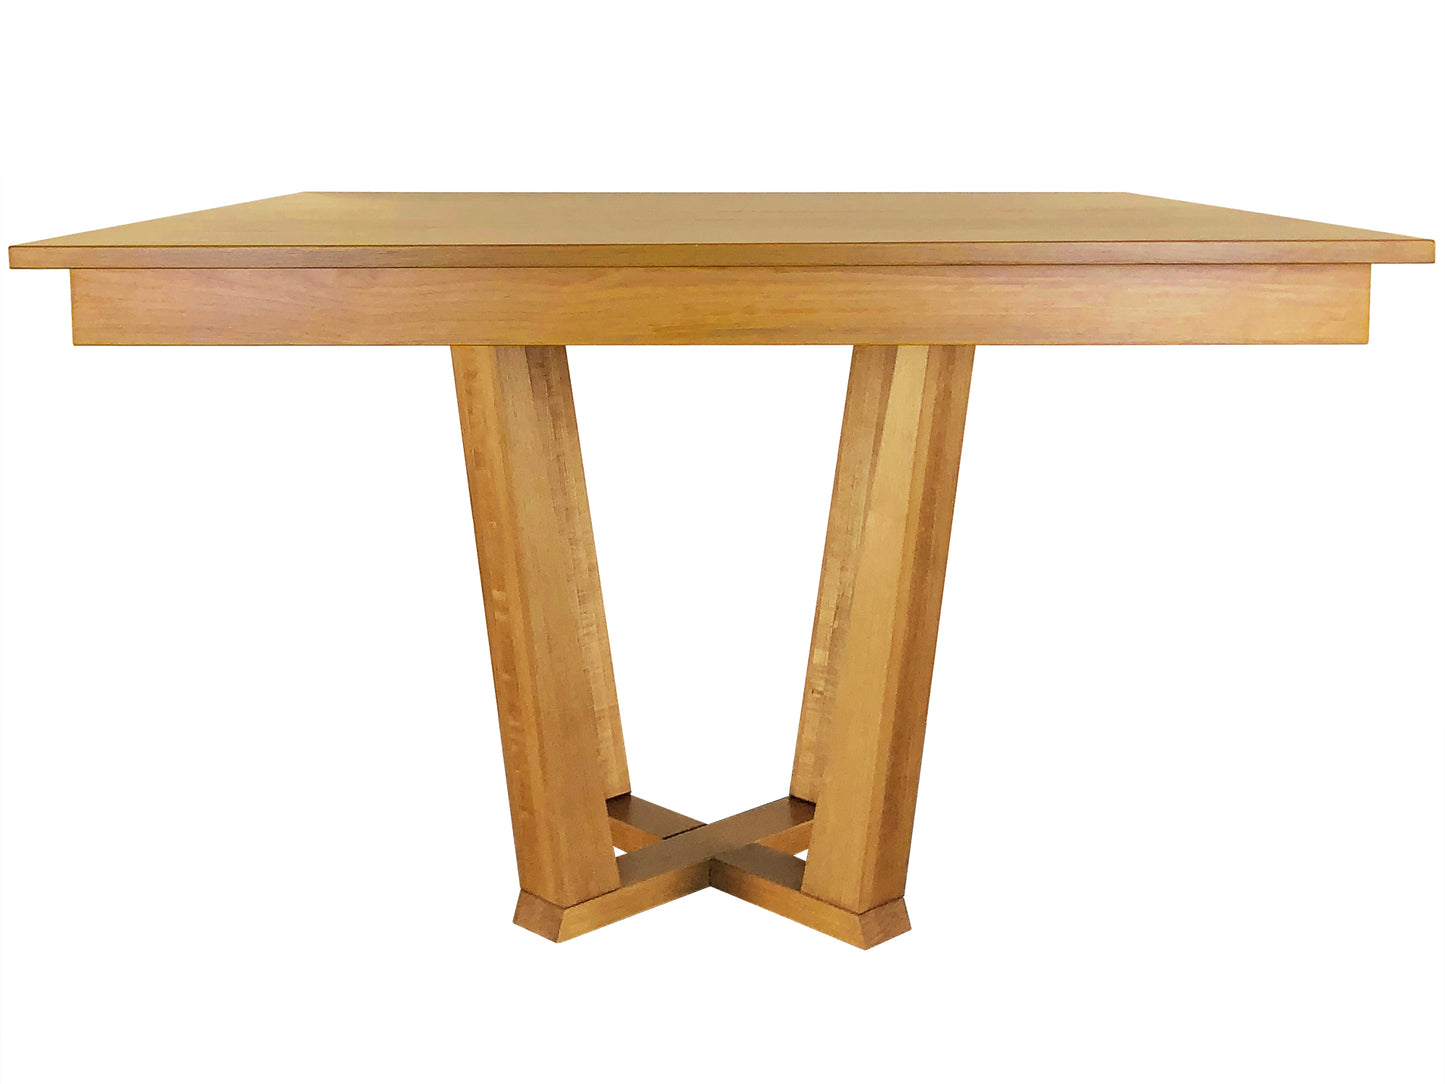 Adam Pedestal Table, built to order with solid wood only, part of our exclusive in-house designs, Made in BC. Shown here in Maple wood and L46 stain